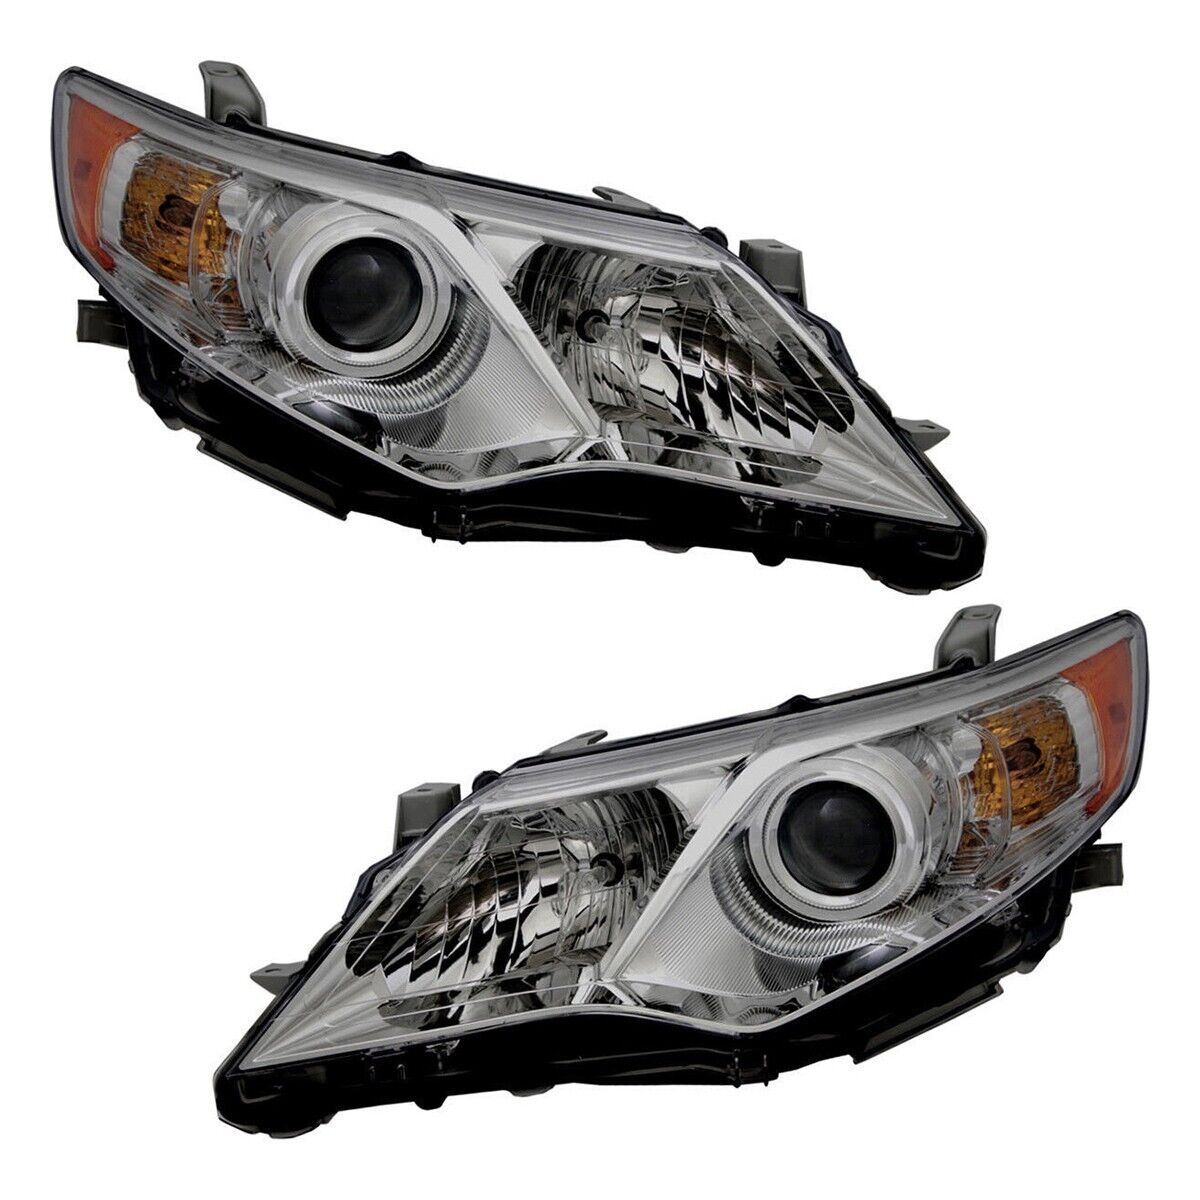 DEPO Headlight Set For 2012-2014 Toyota Camry Driver & Passenger Side TO2502211